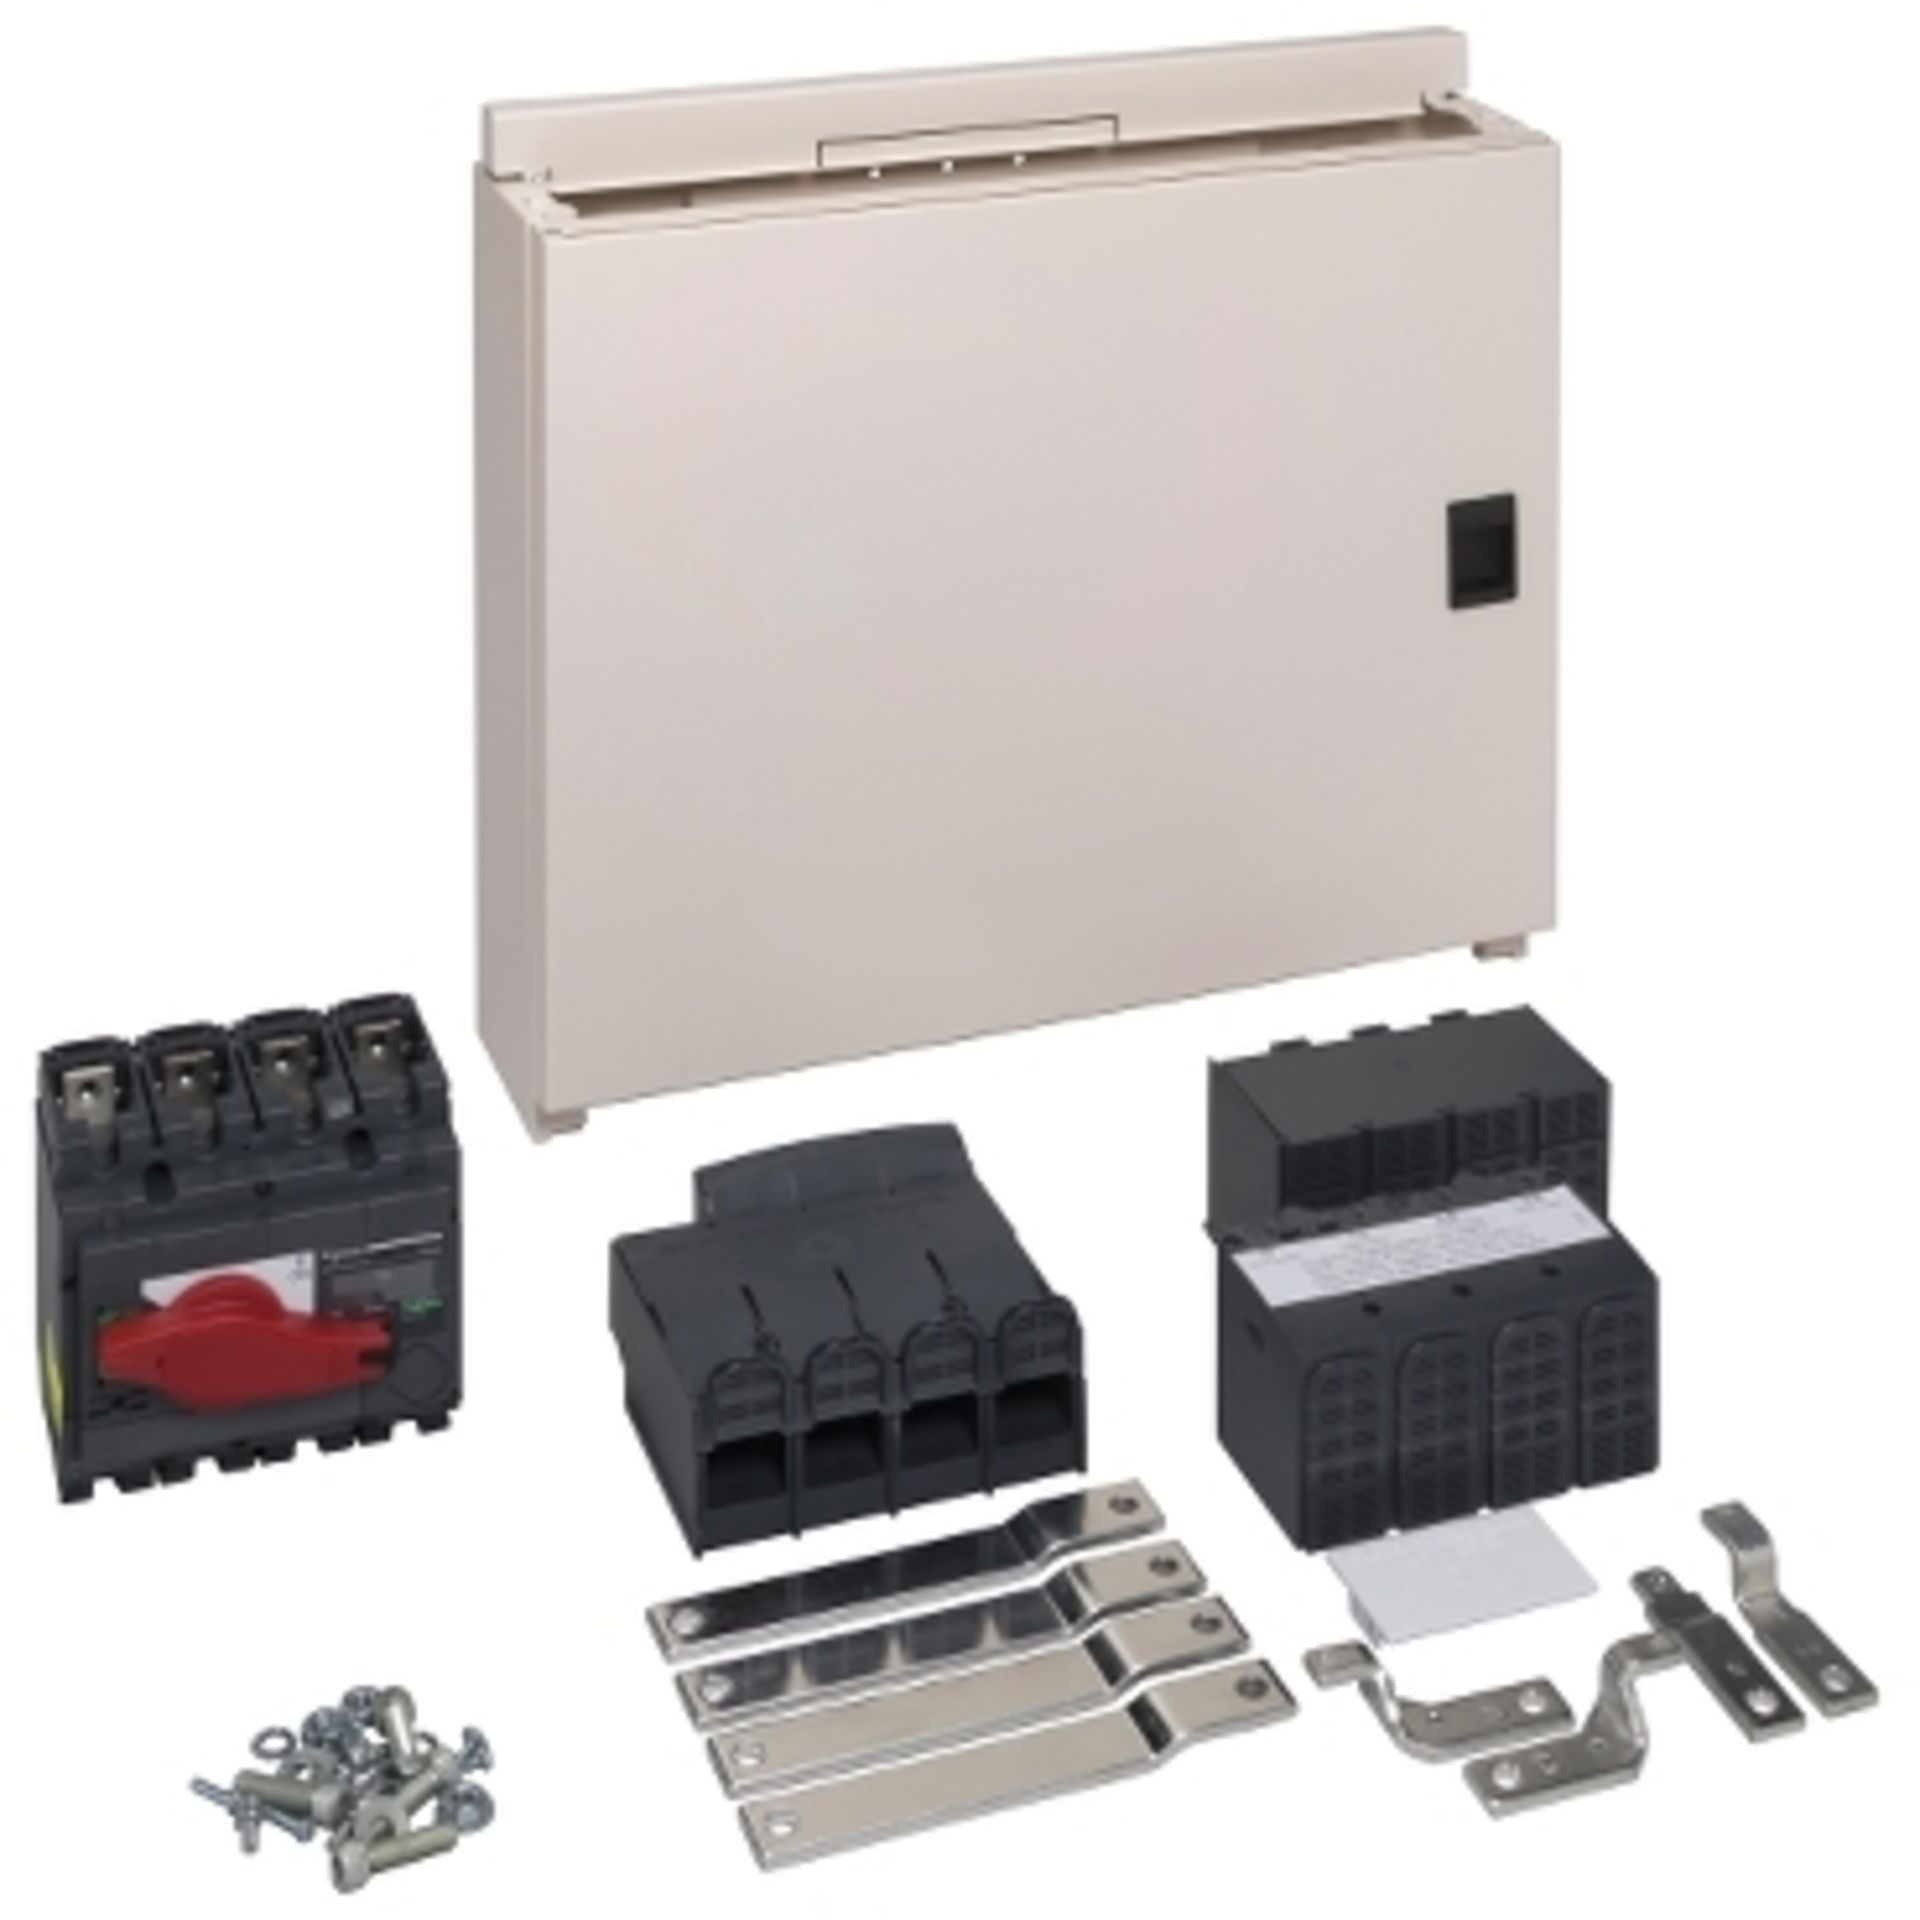 1 x Schneider Acti9 Isobar Incoming Extension Box Kit With 160A 3P+N Switch Disconnector SEA9NI1603